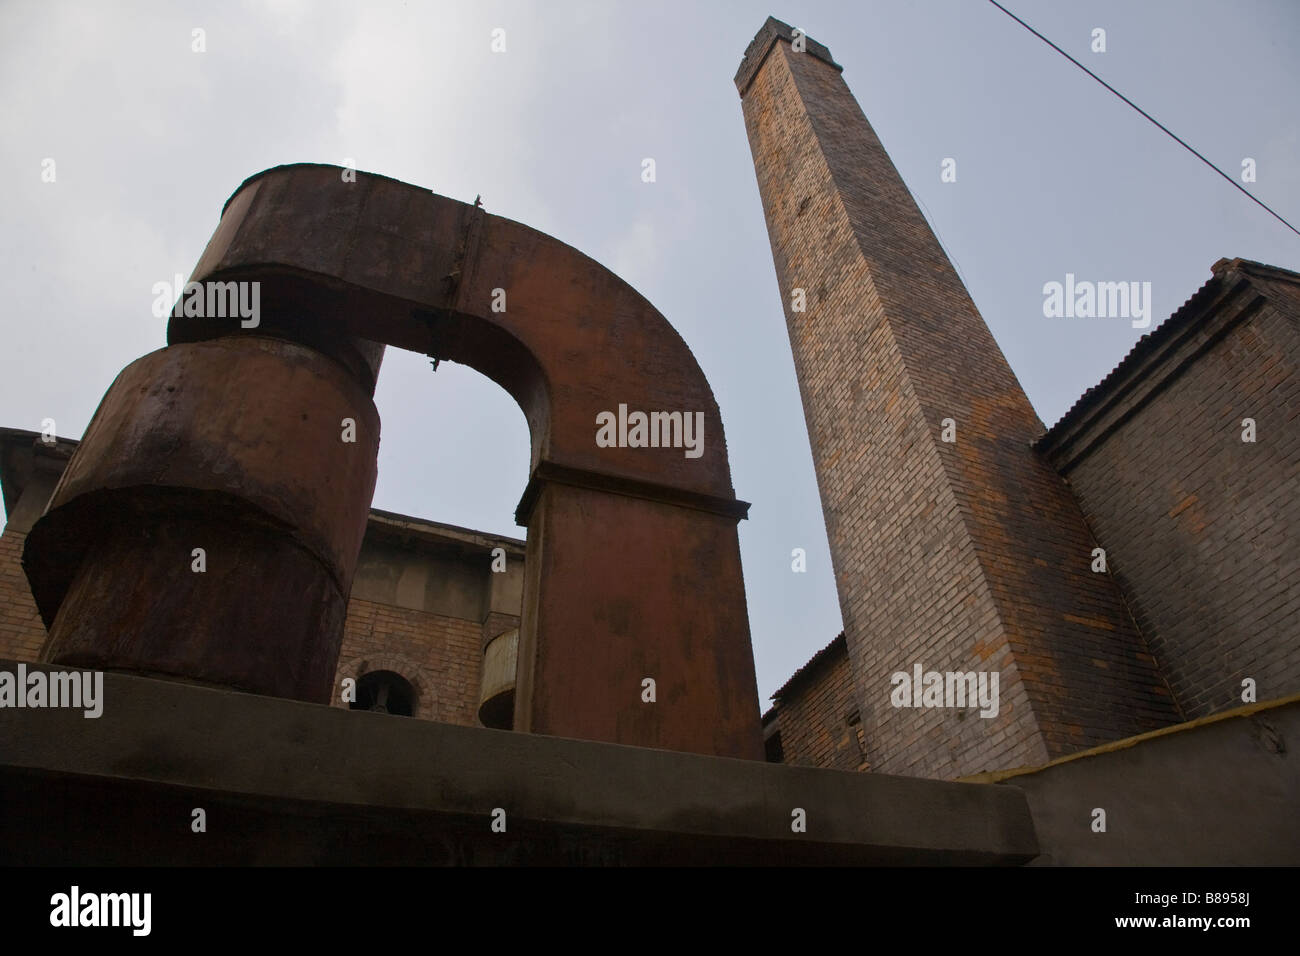 Chimney of the hospital boilery that houses the remnants of the Kaifeng synagogue. Kaifeng is famed for its jewish community. Stock Photo